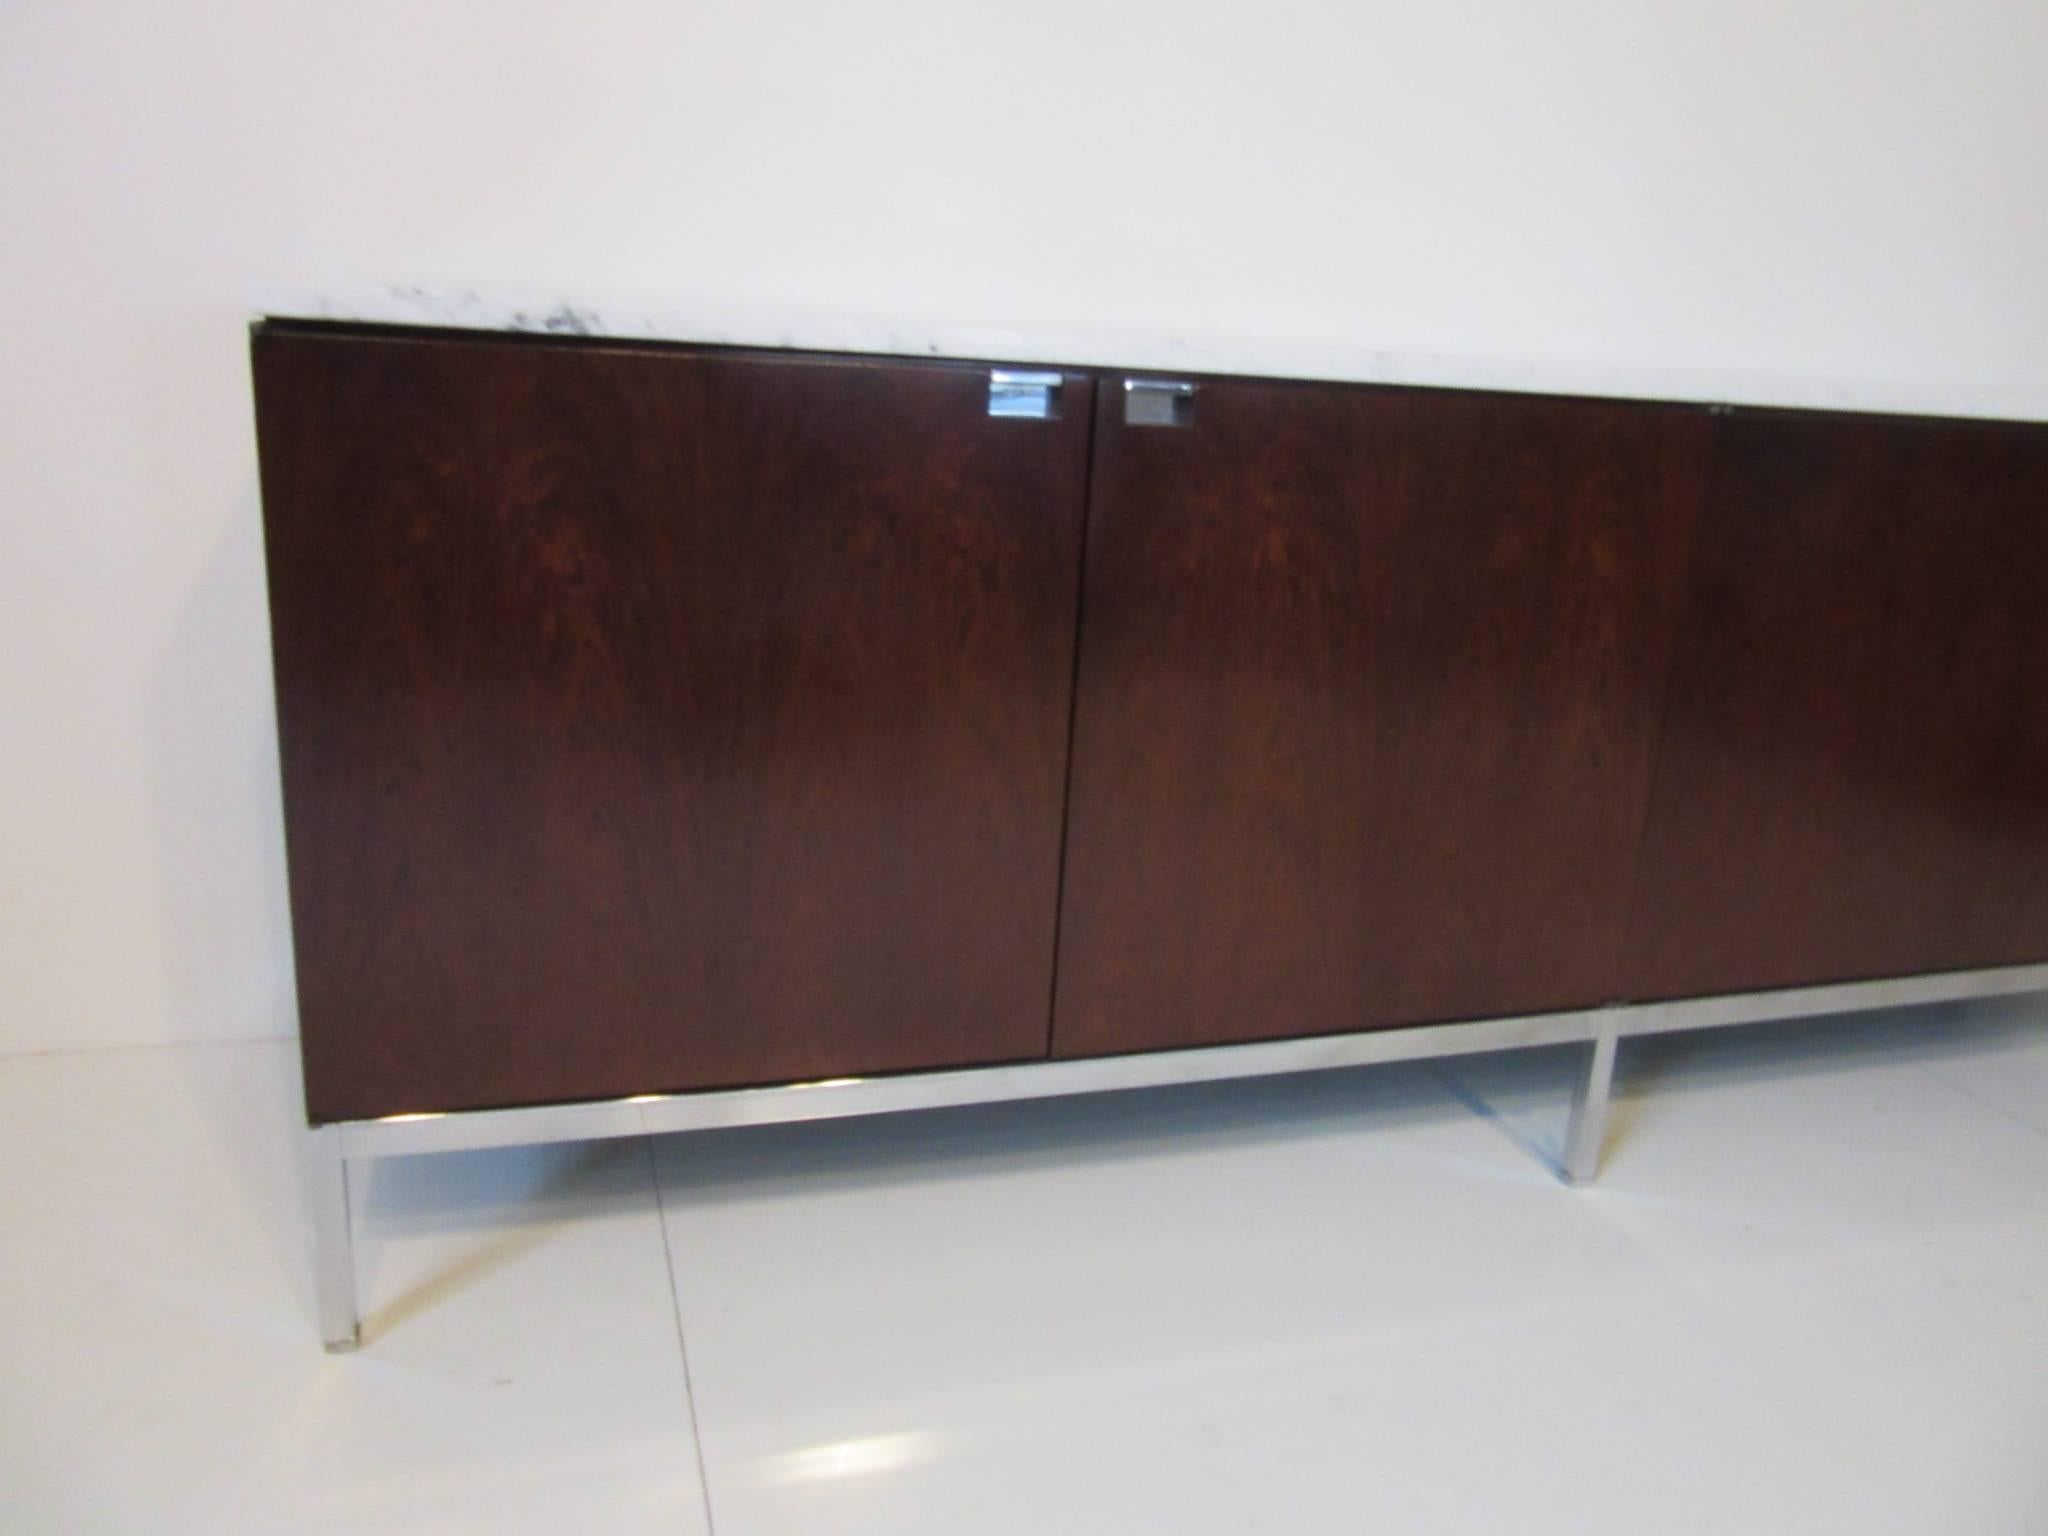 A dark Brazilian rosewood credenza with white Carrara marble top, four doors, adjustable shelves, chrome pulls, bottom frame and legs. Manufactured by Knoll International.